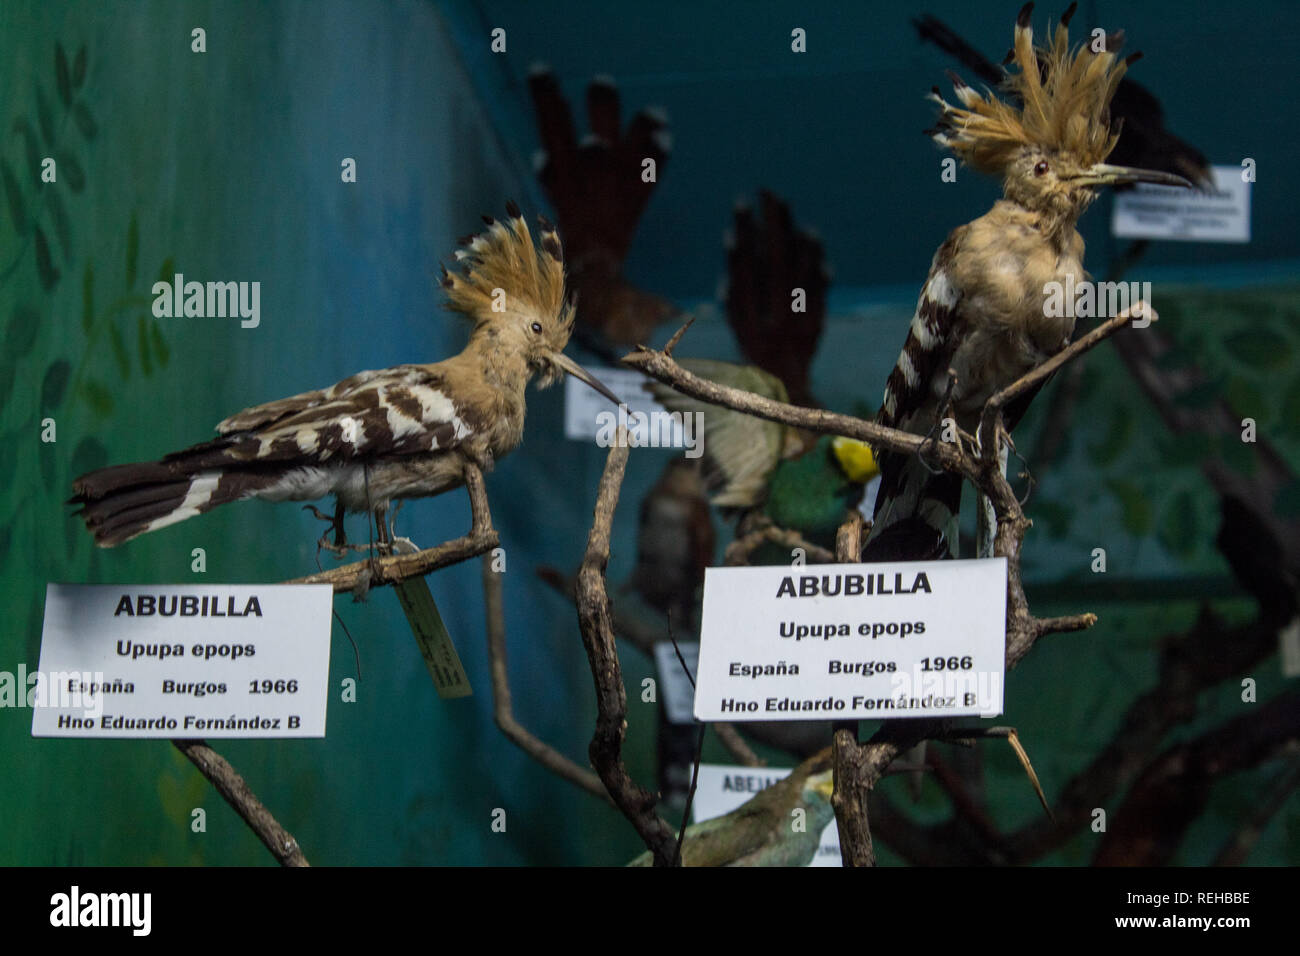 An exhibition of hoopoes (Upupa epops) at La Salle Natural History Museum, San Jose, Costa Rica Stock Photo